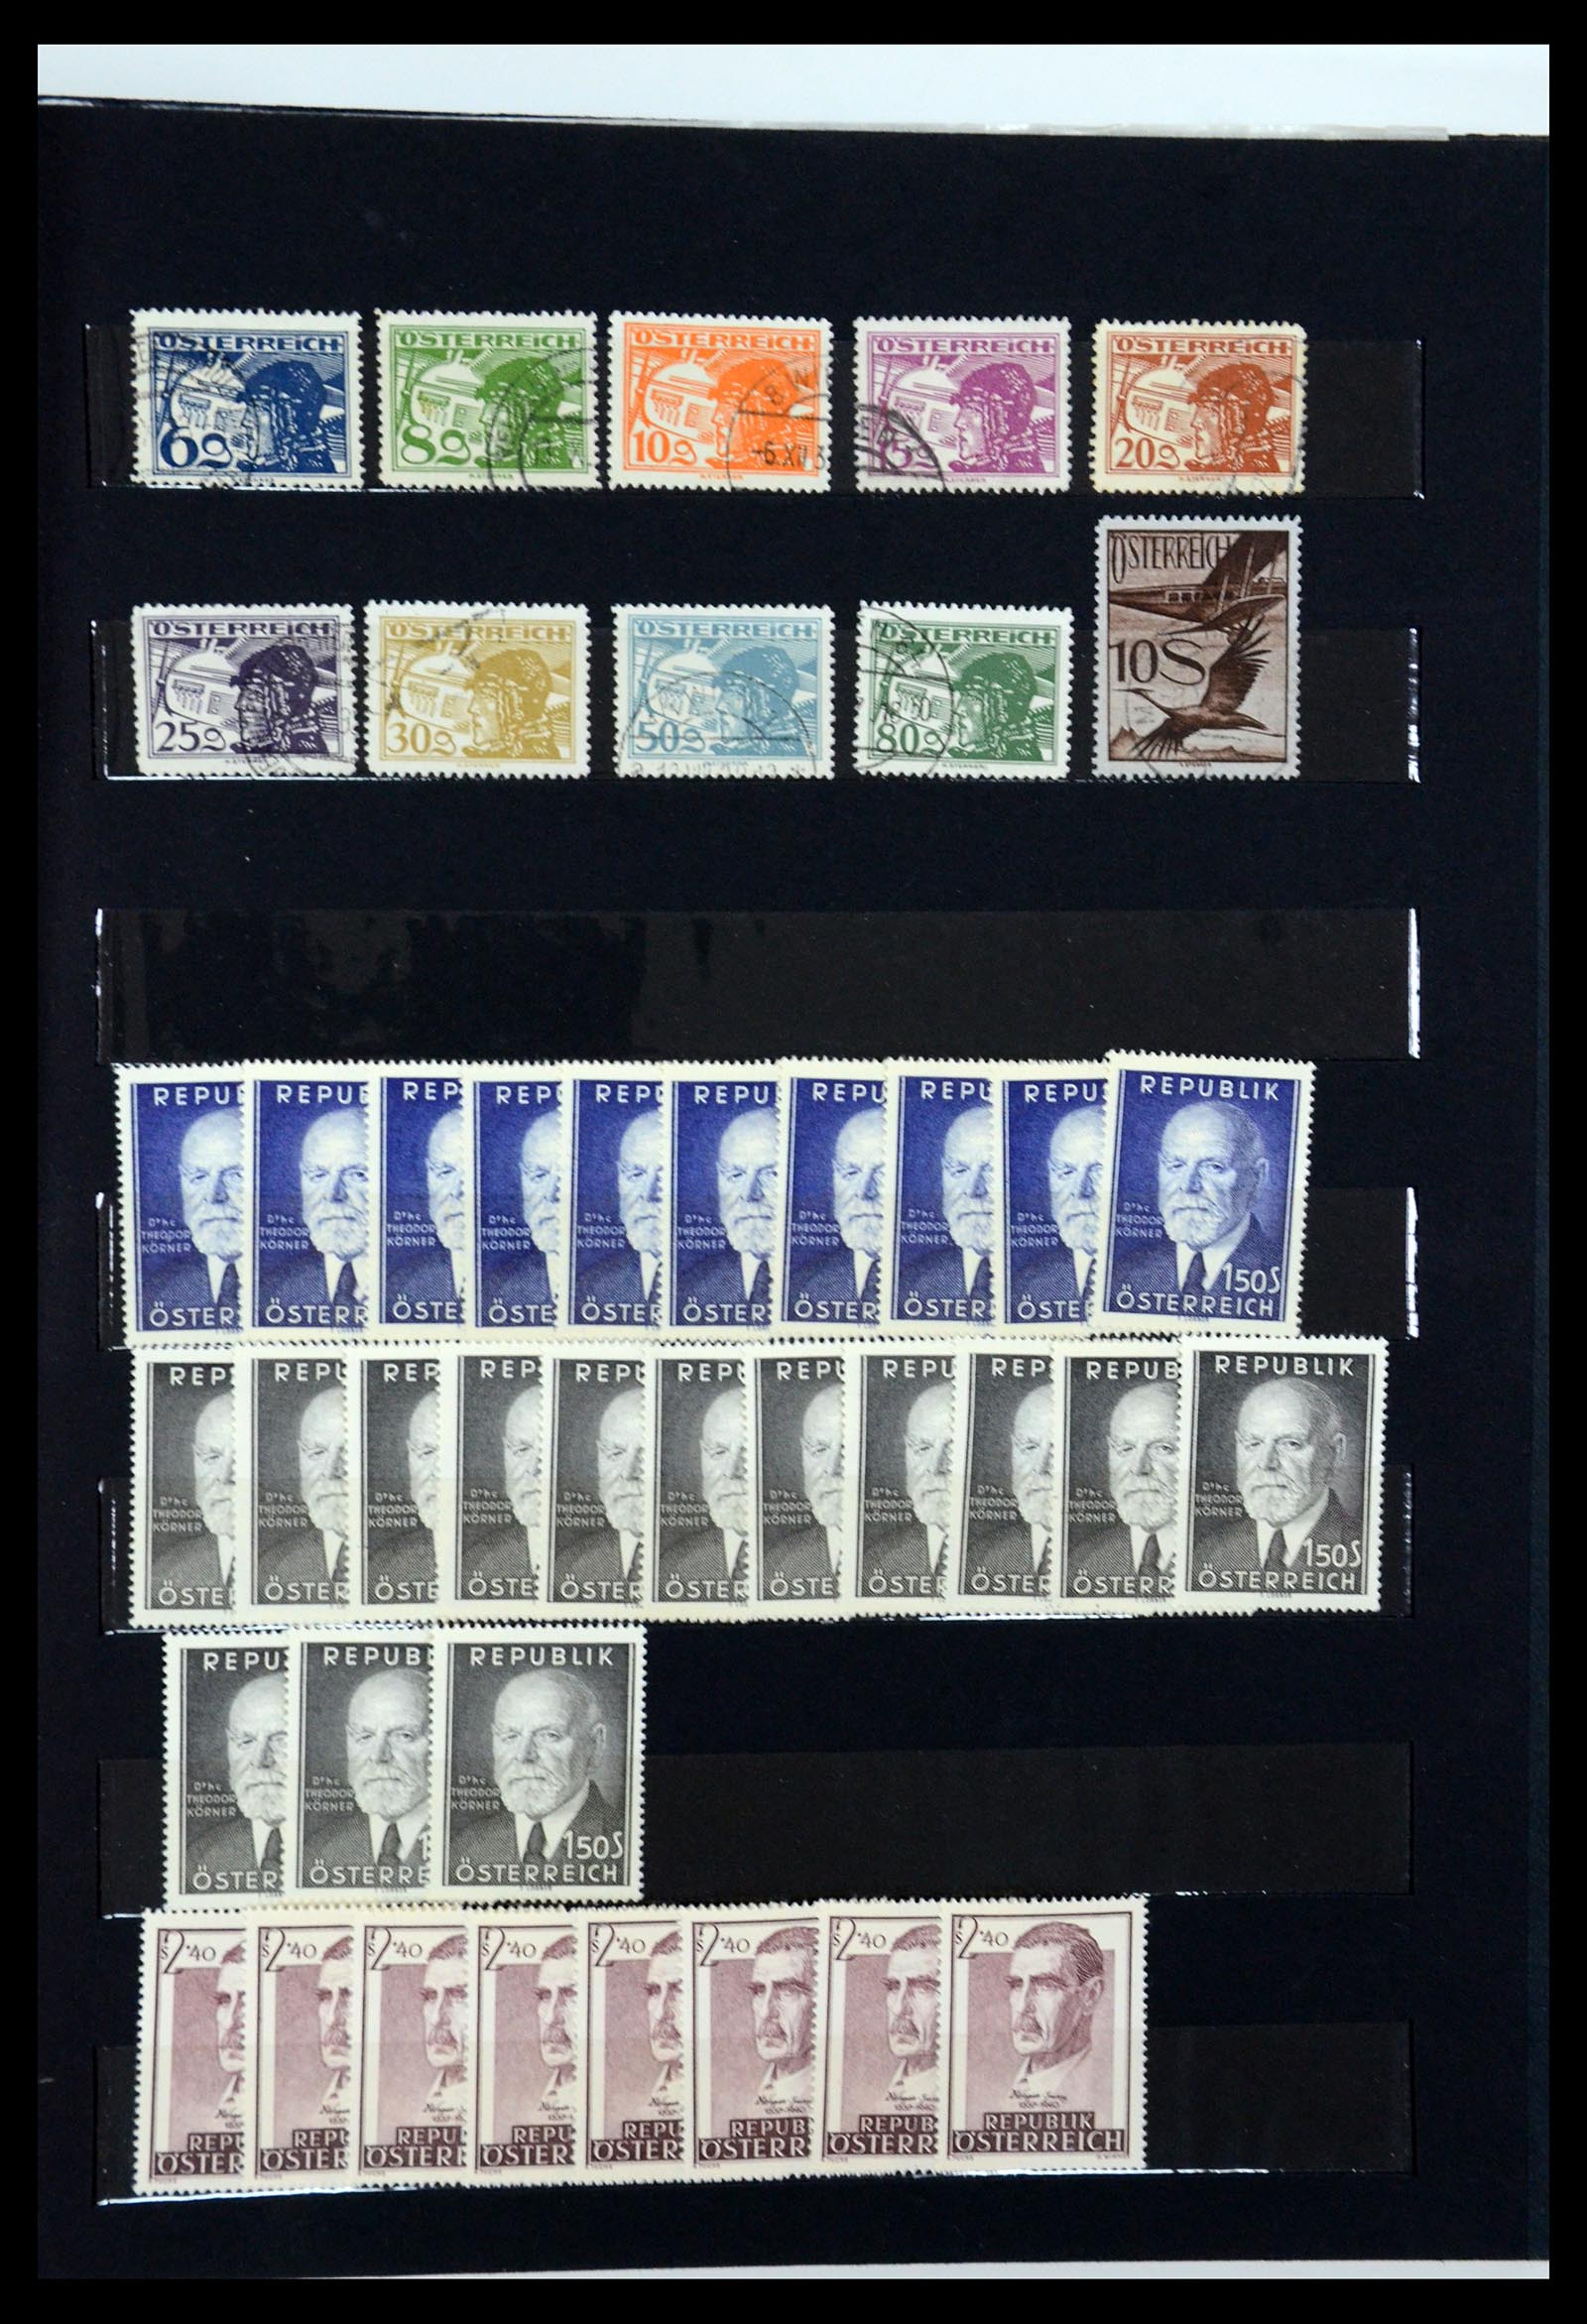 36002 015 - Stamp collection 36002 Austria and territories 1858-1958.